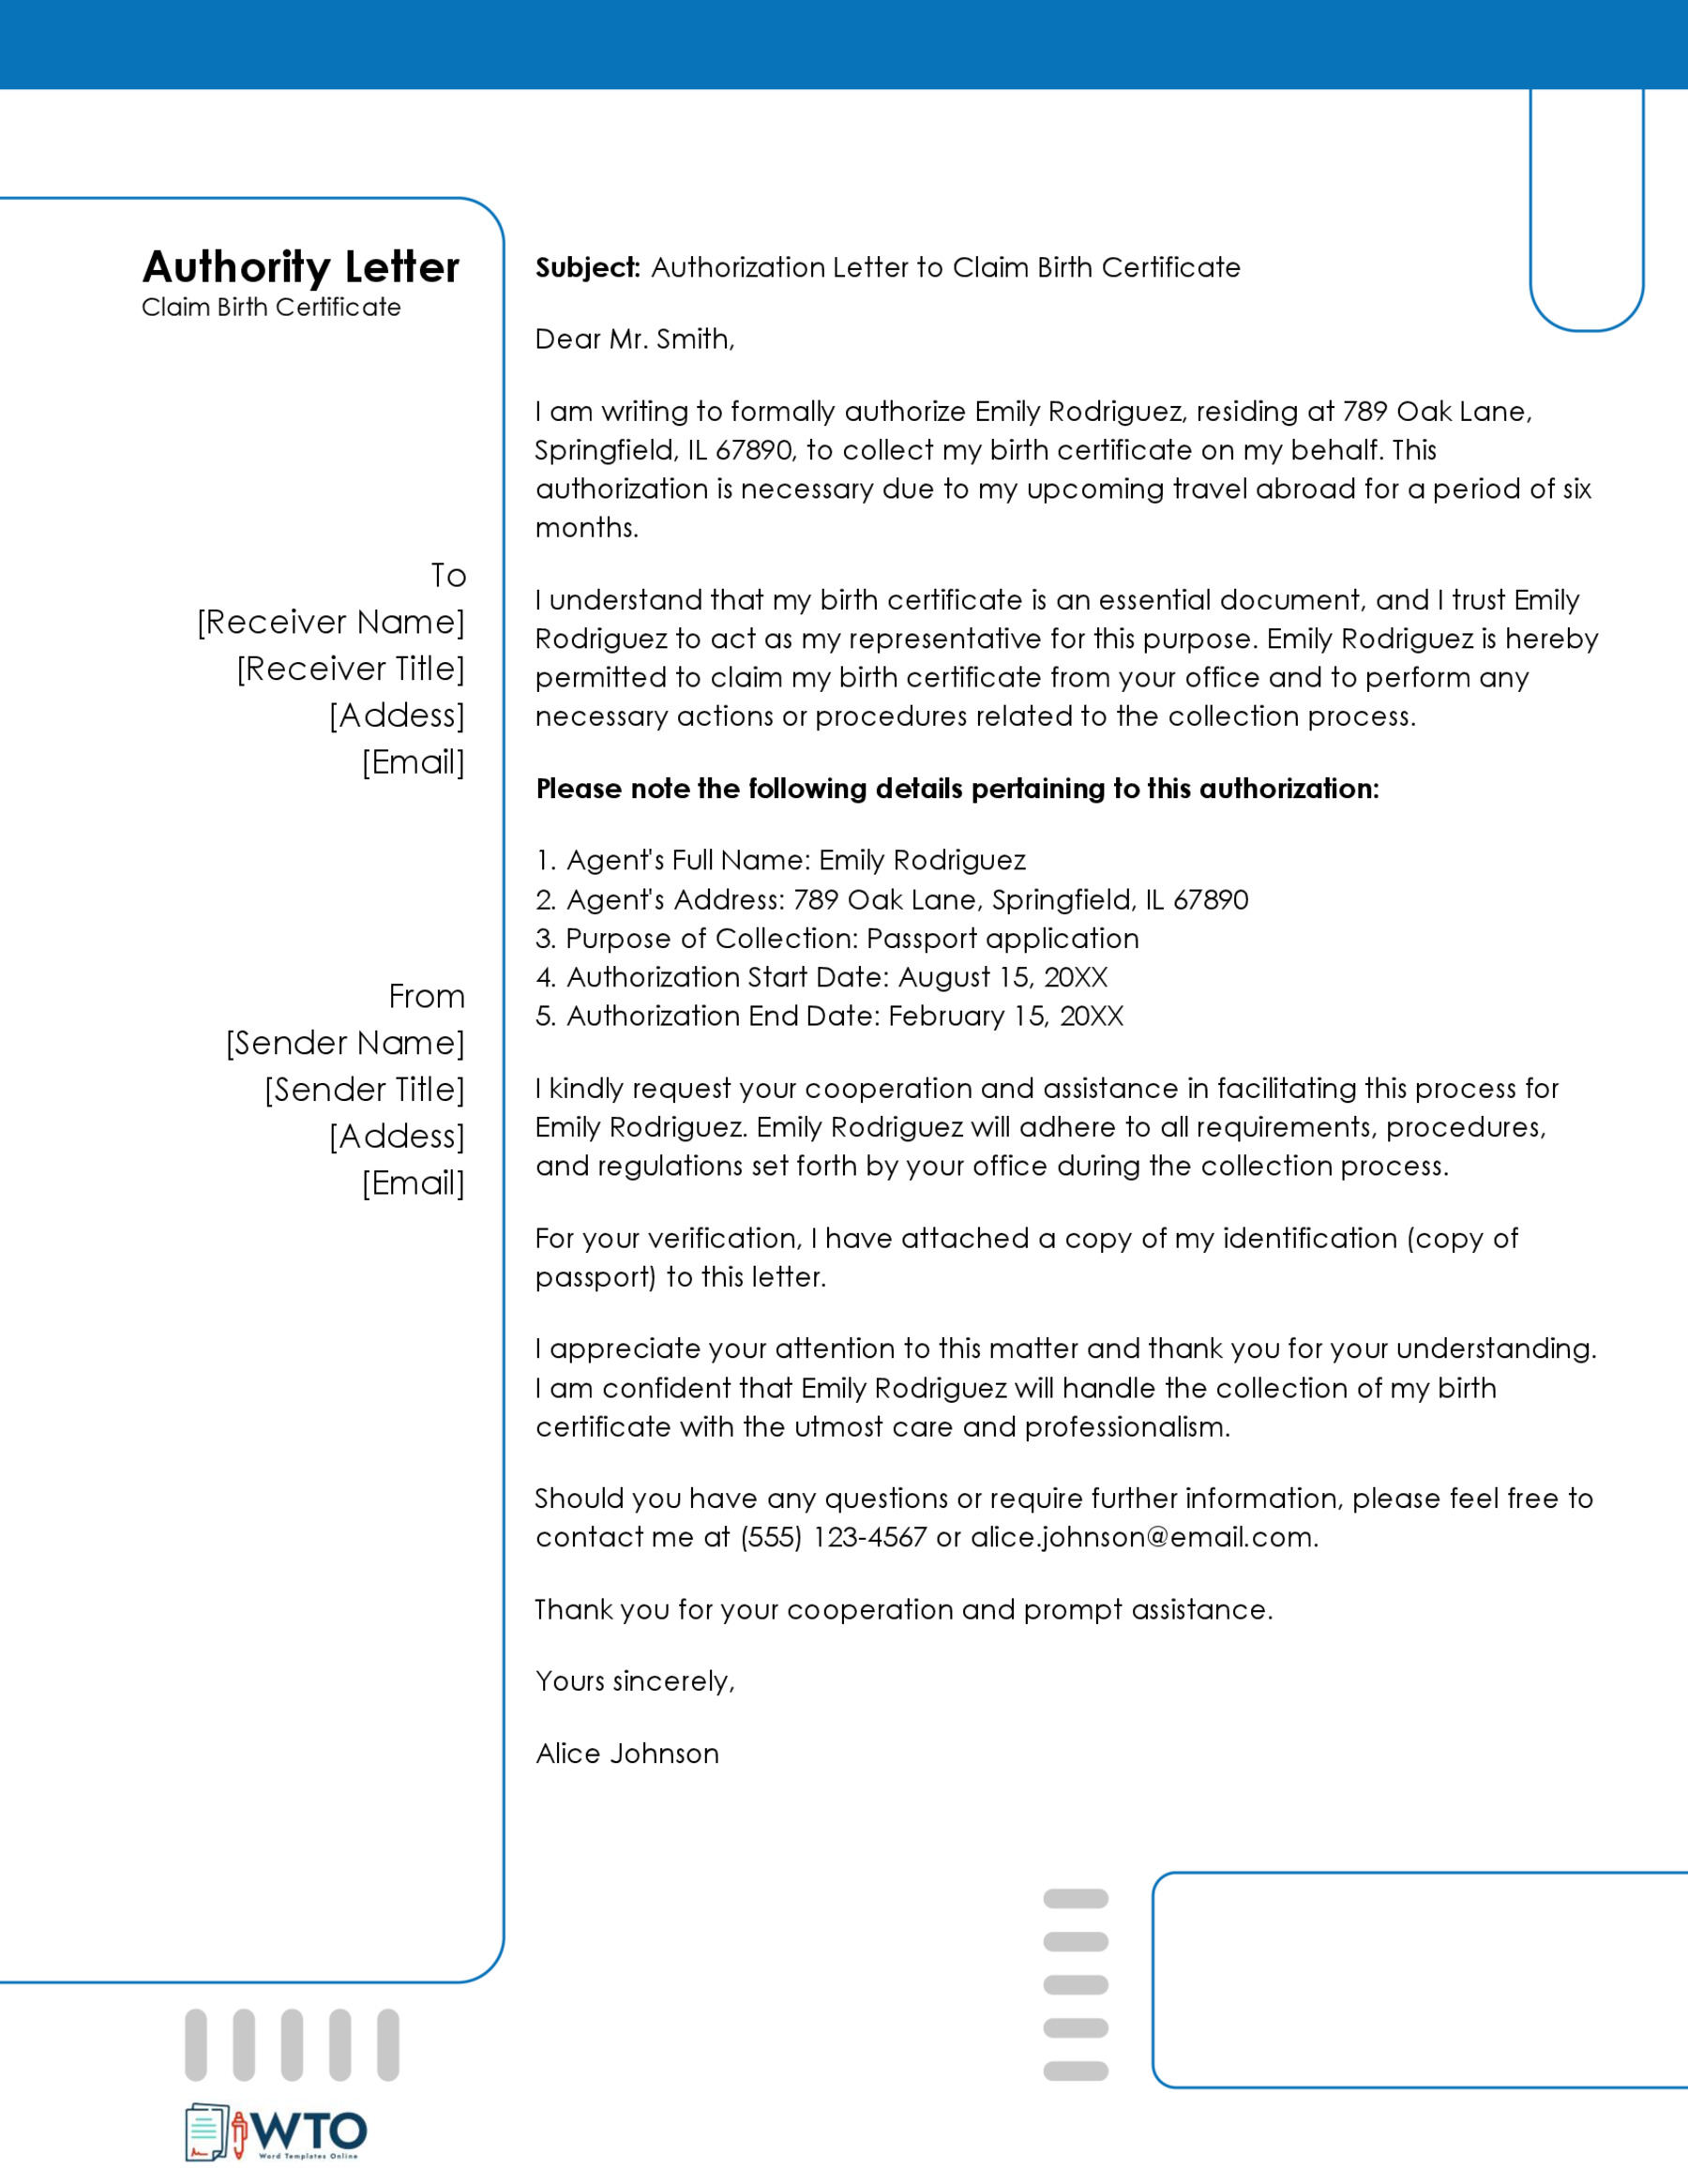 Authorization Letter to Claim a Birth Certificate Sample-in word free download